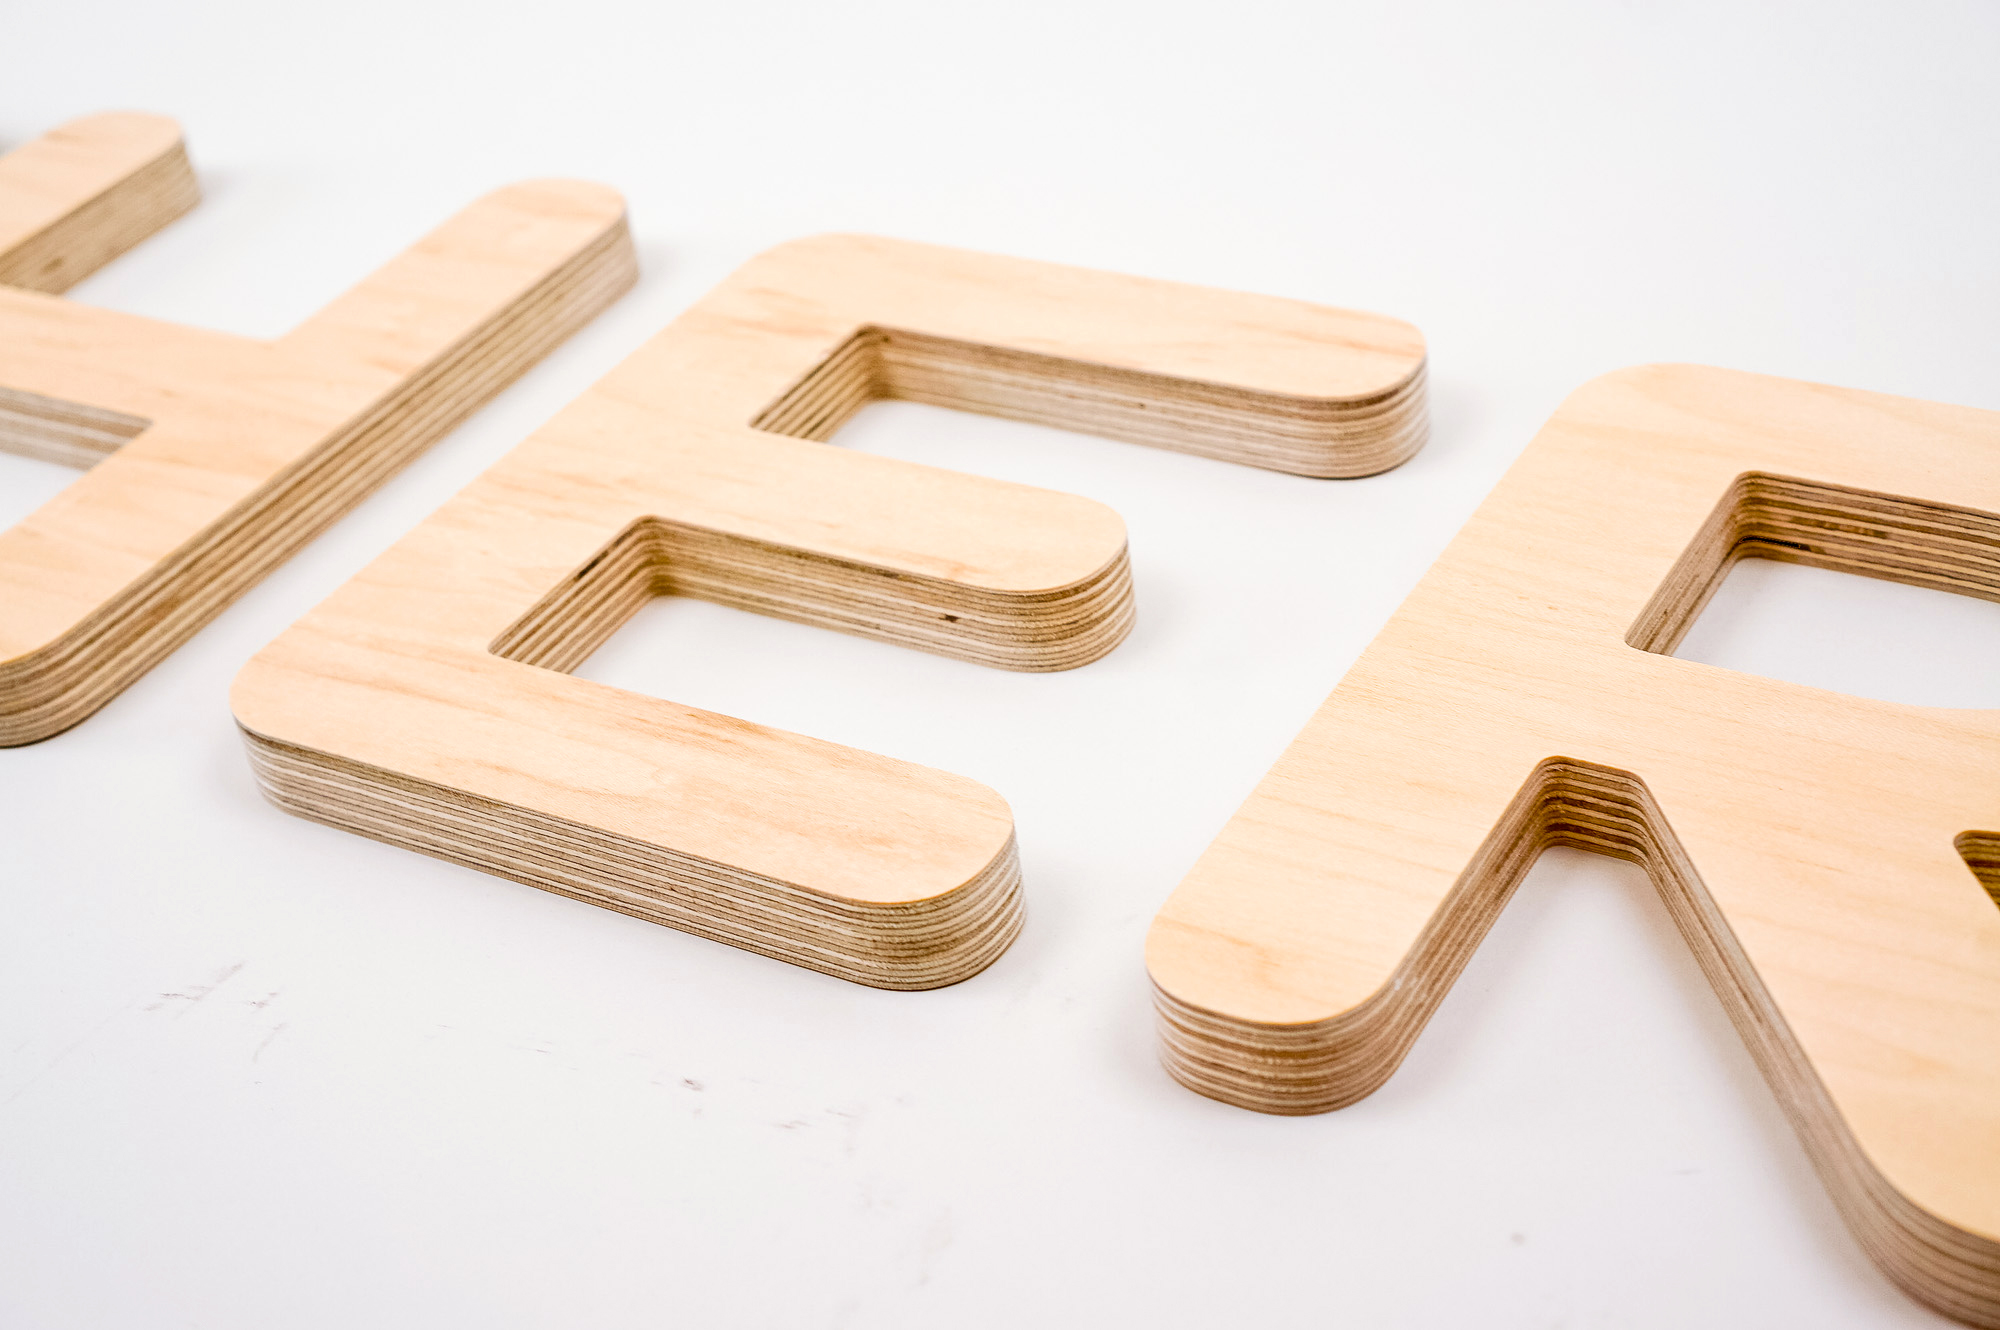 CNC routed plywood letters for Feather, furniture renting service.